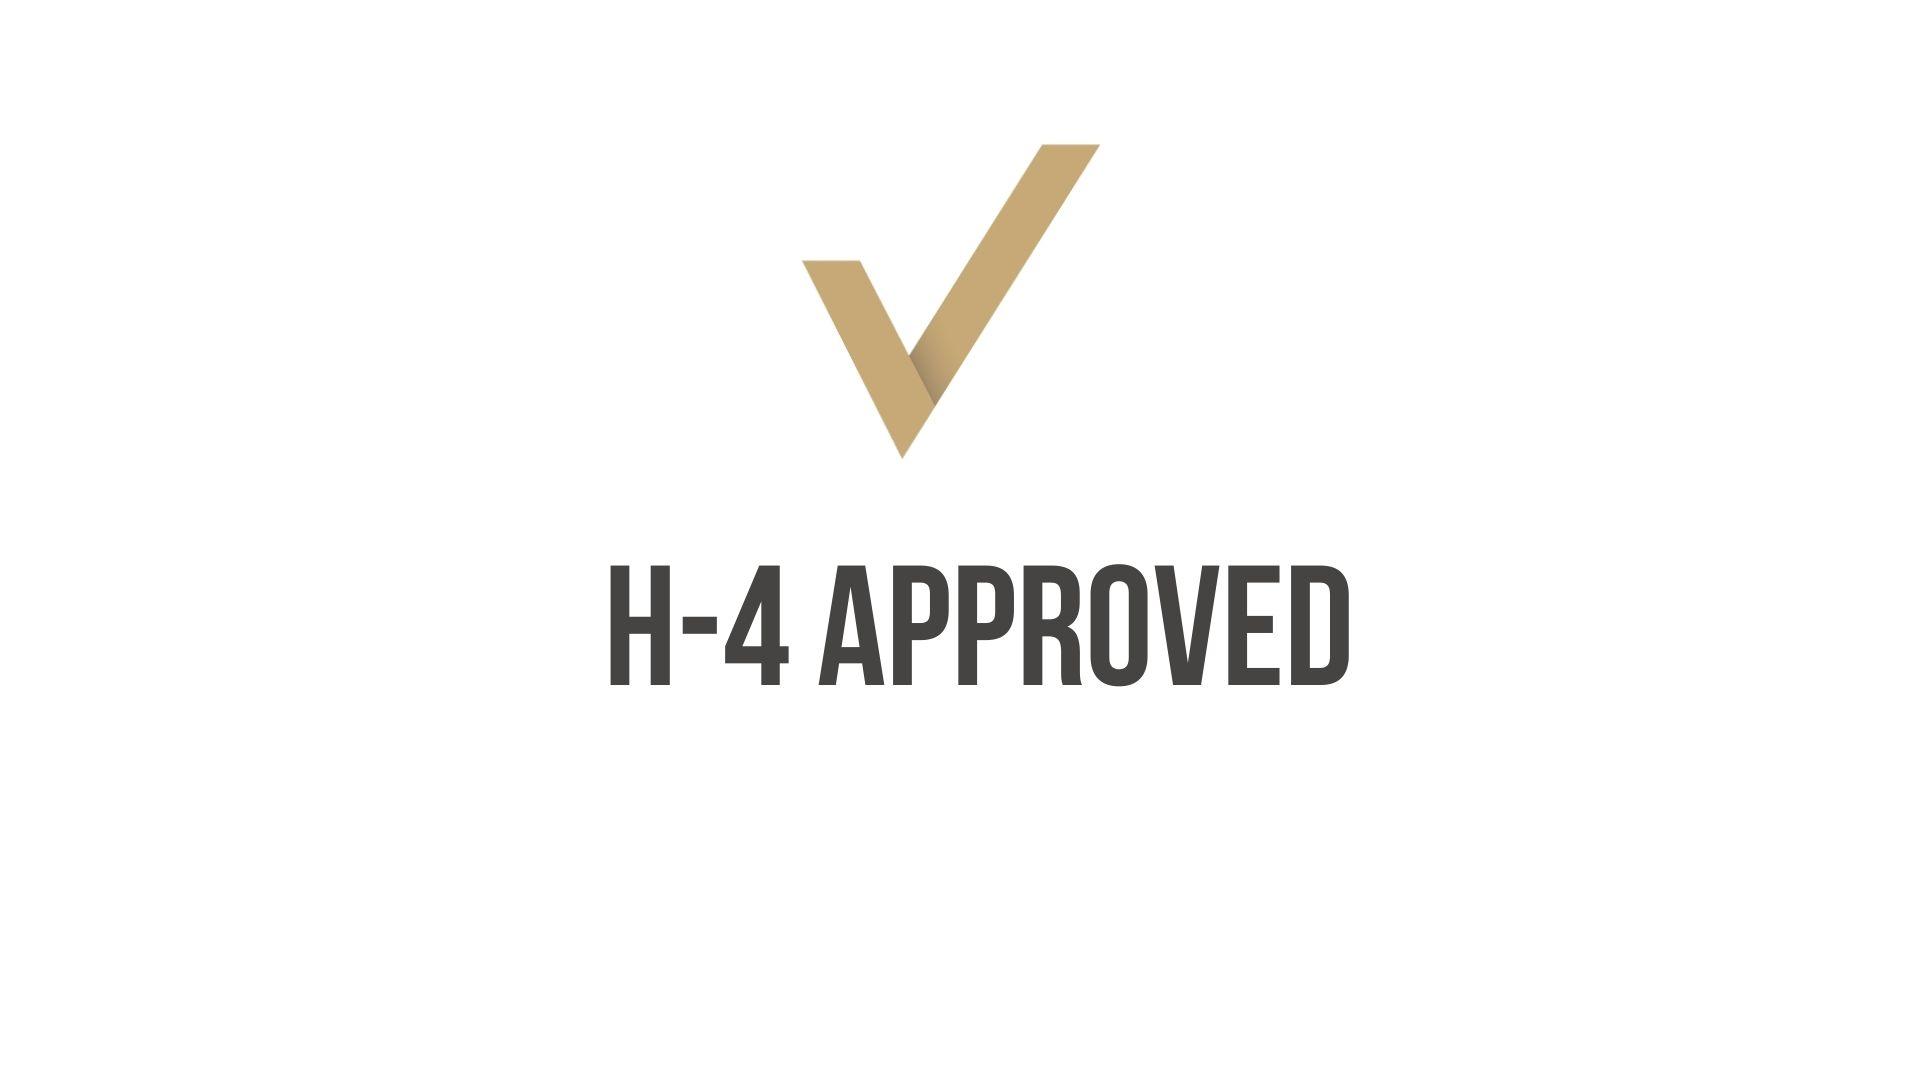 H-4 Approval for Spouse, Children and Sibling of H-1B Visa Holder